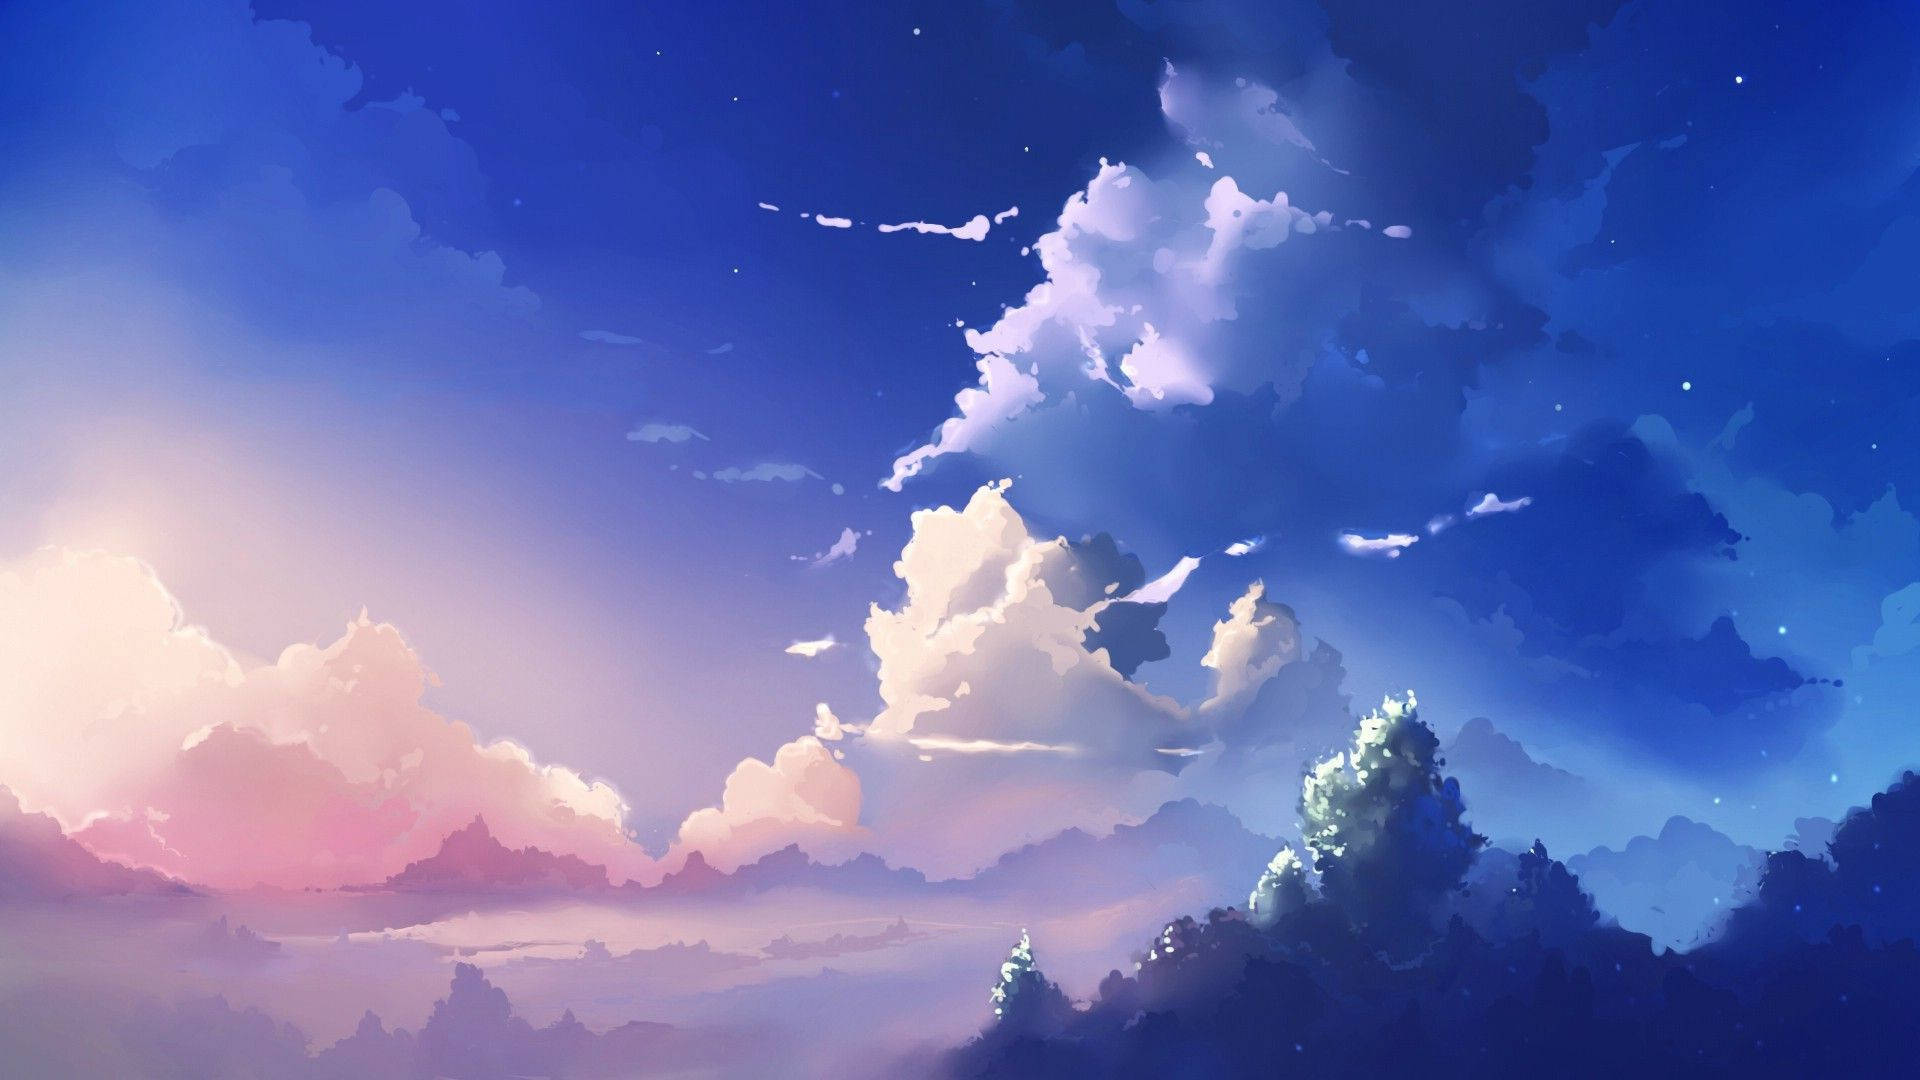 Pretty Blue And Pink Anime Sky Wallpaper